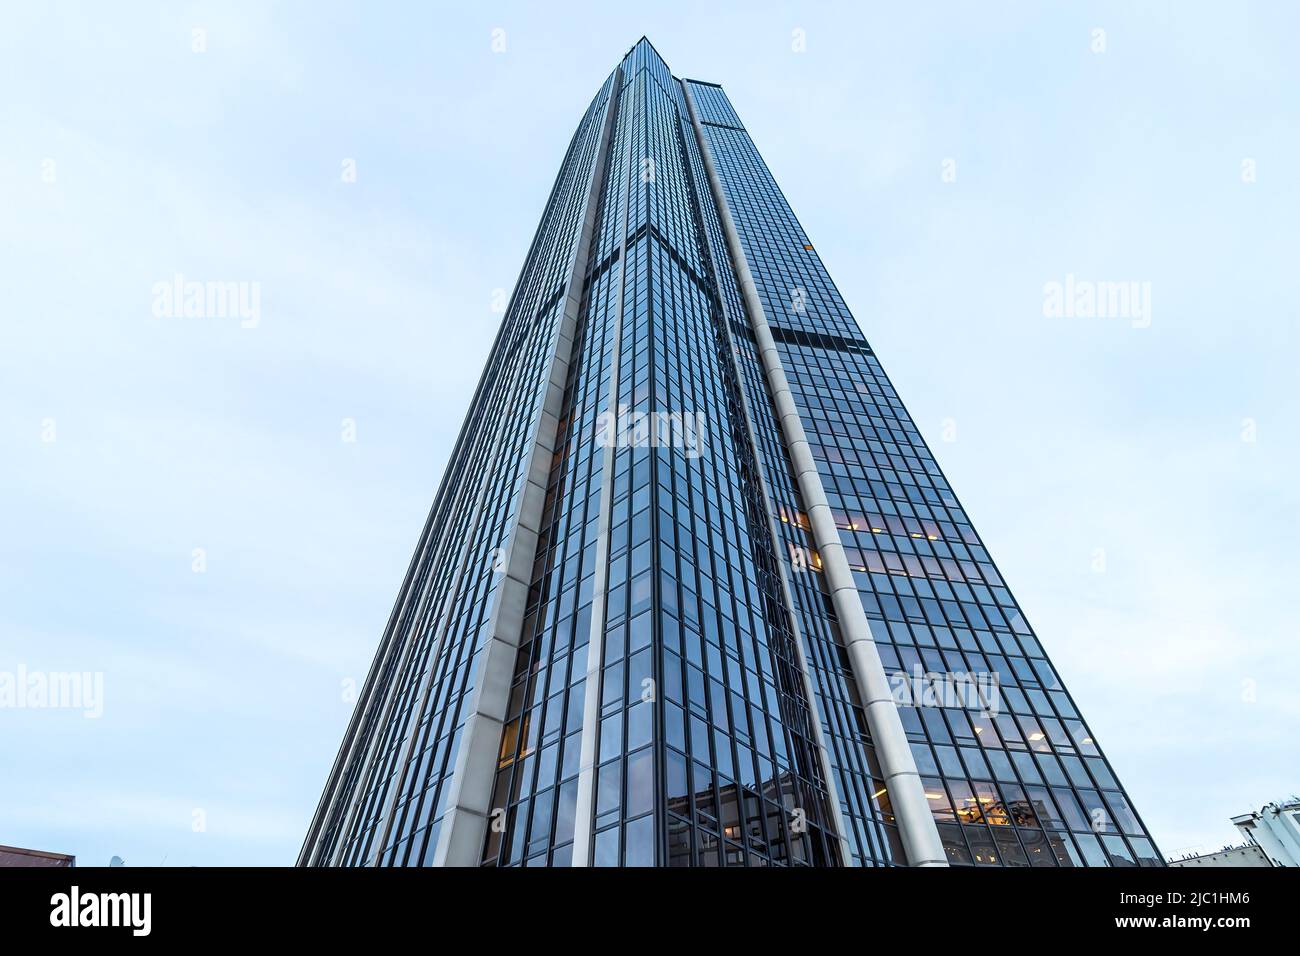 Paris, France - March 18, 2018: Tour Gan is an office skyscraper located in La Défense, the high-rise business district situated west of Paris, France Stock Photo